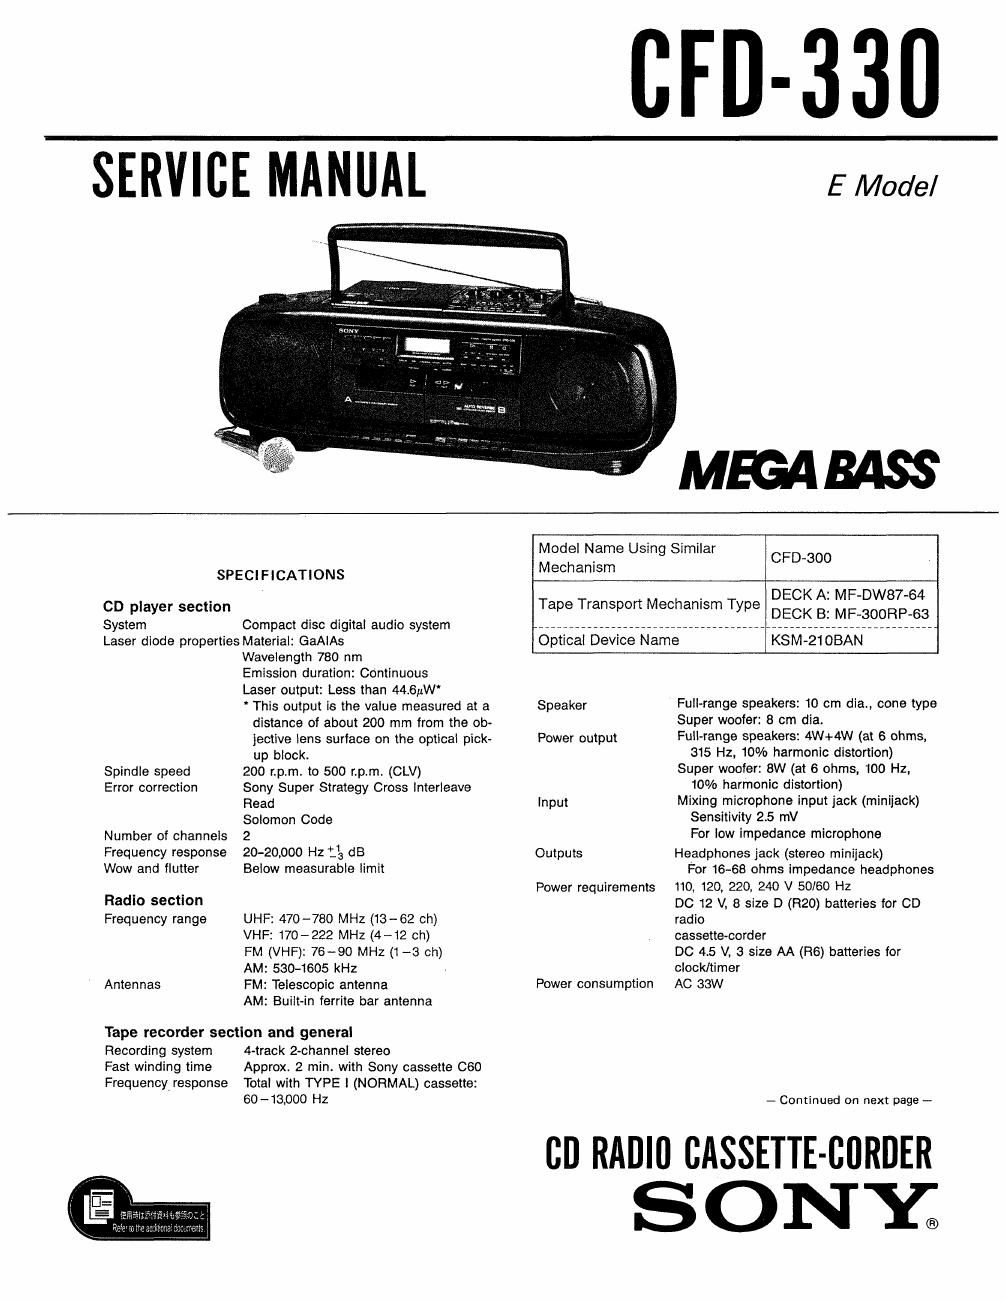 sony cfd 330 service manual